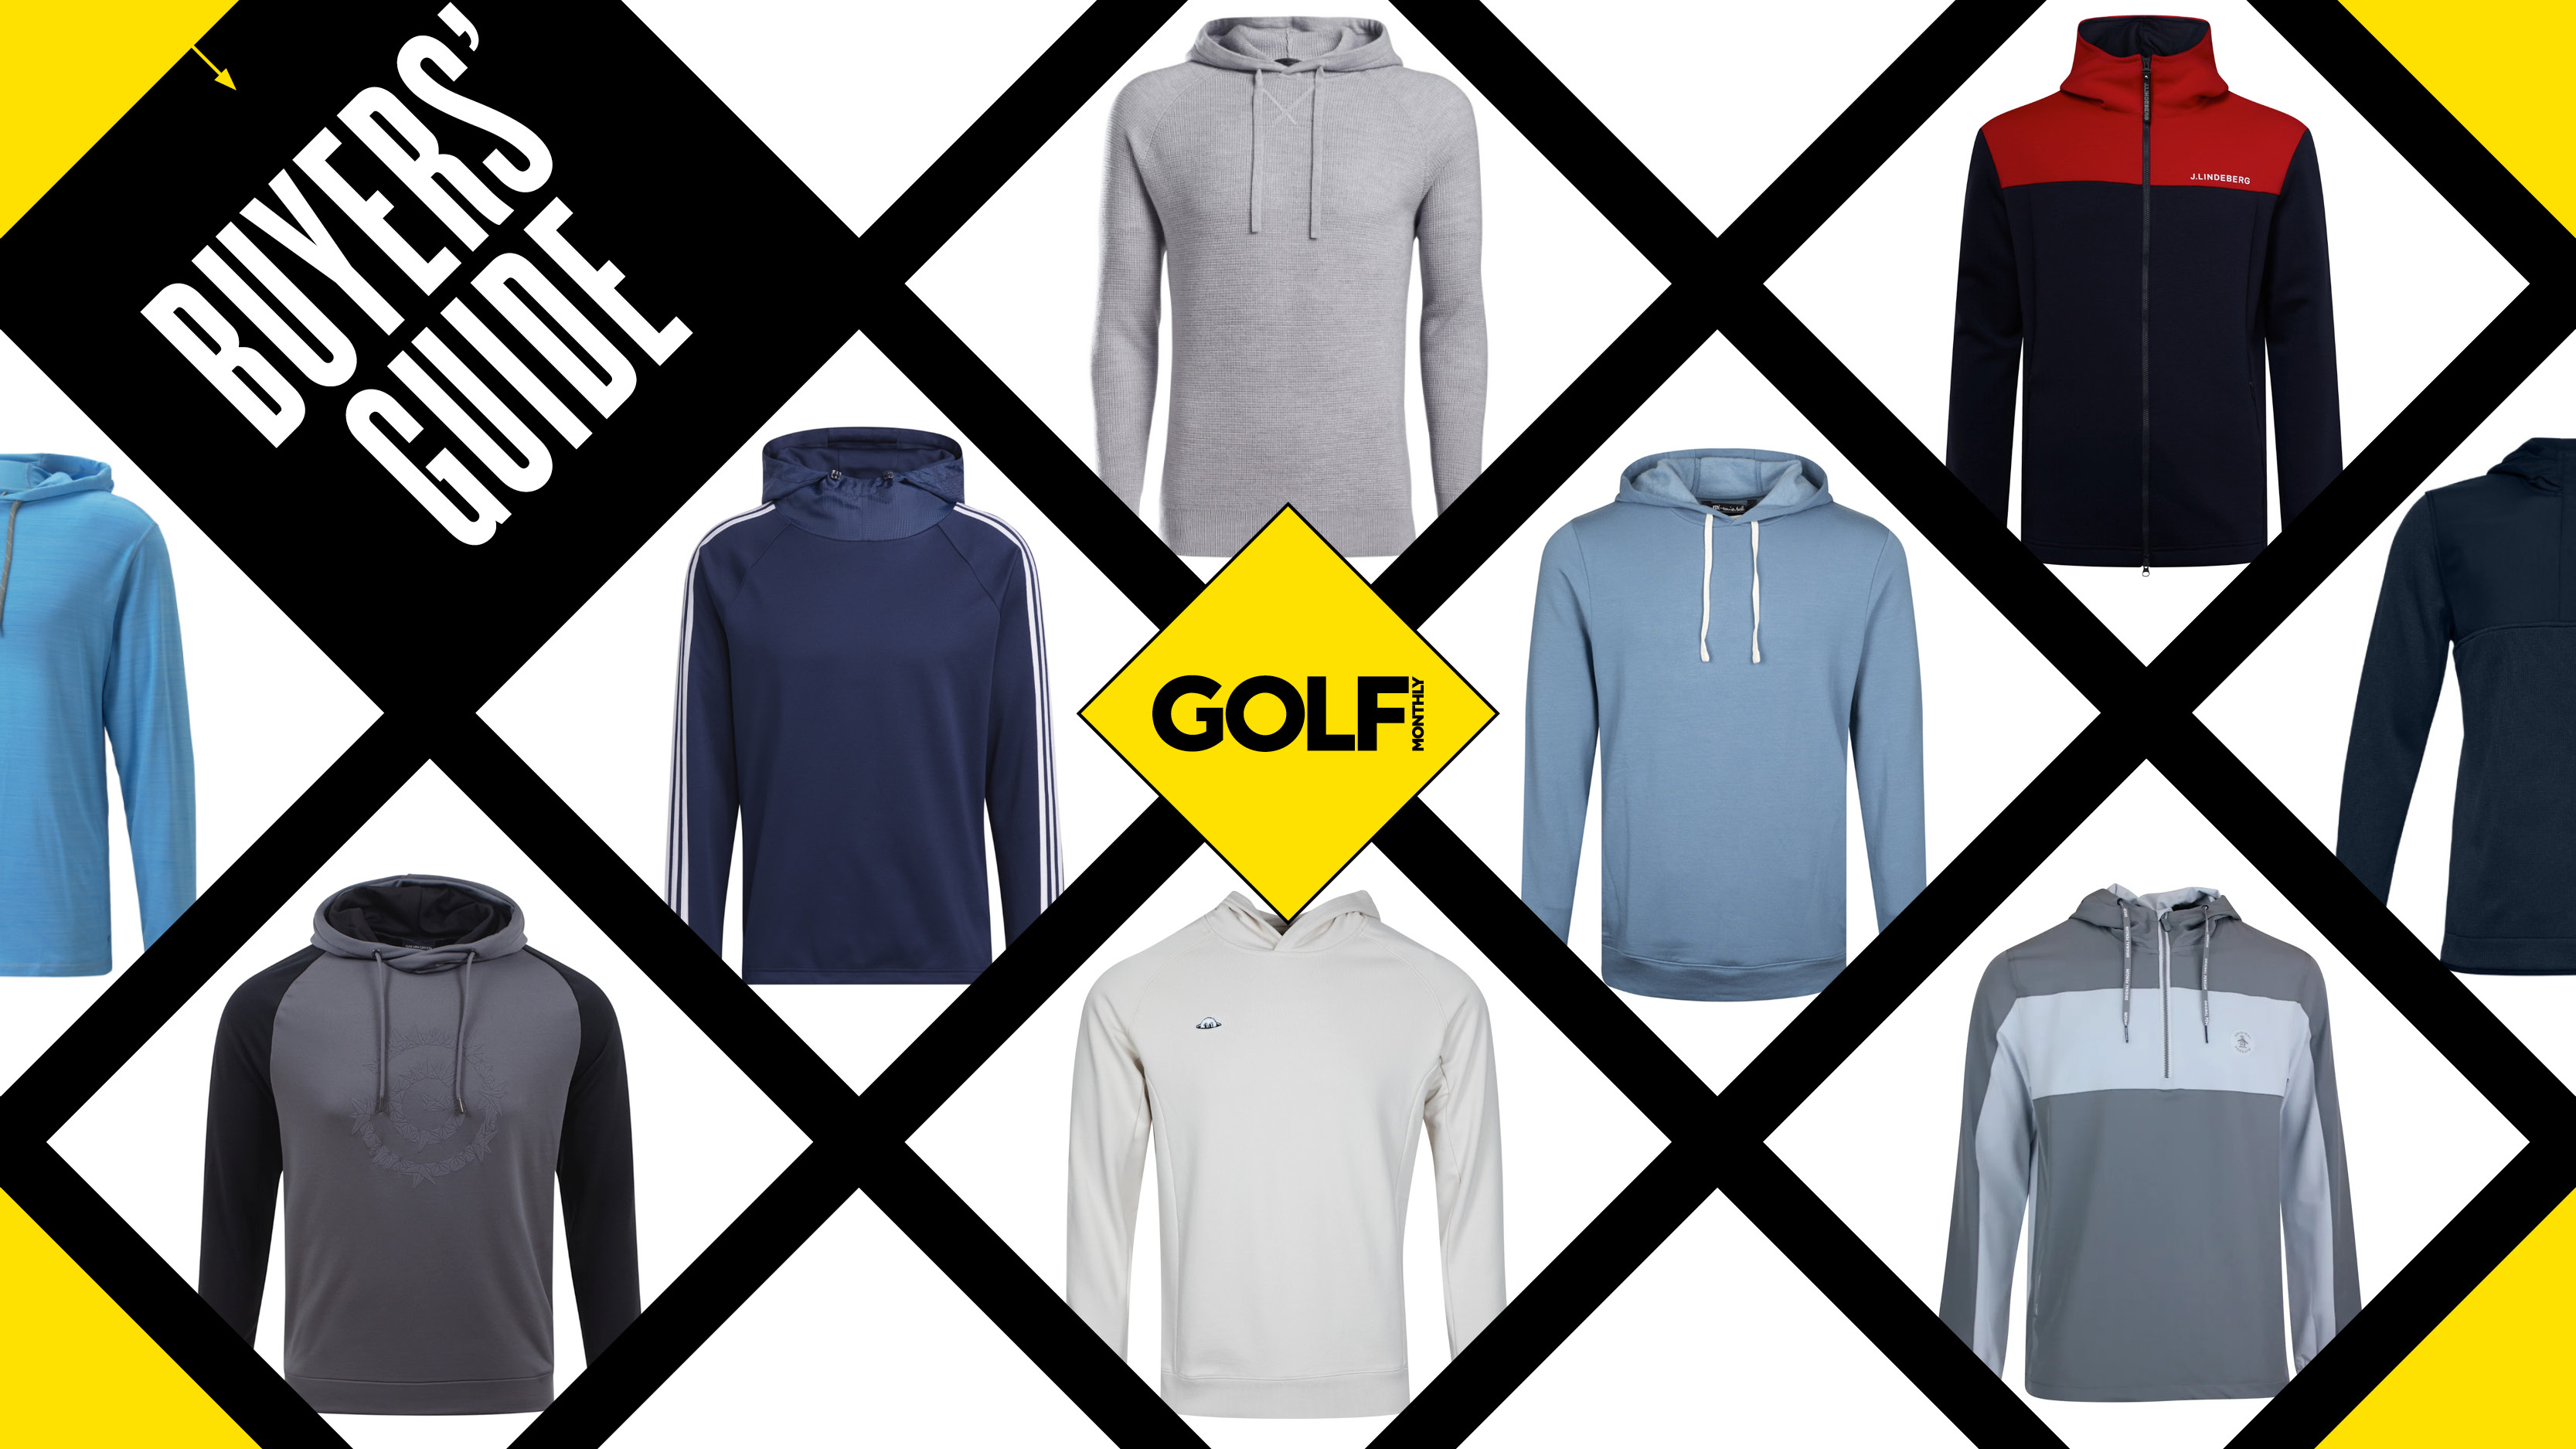 Branded, Stylish and Premium Quality Dry Fit Hoodie Wholesale 